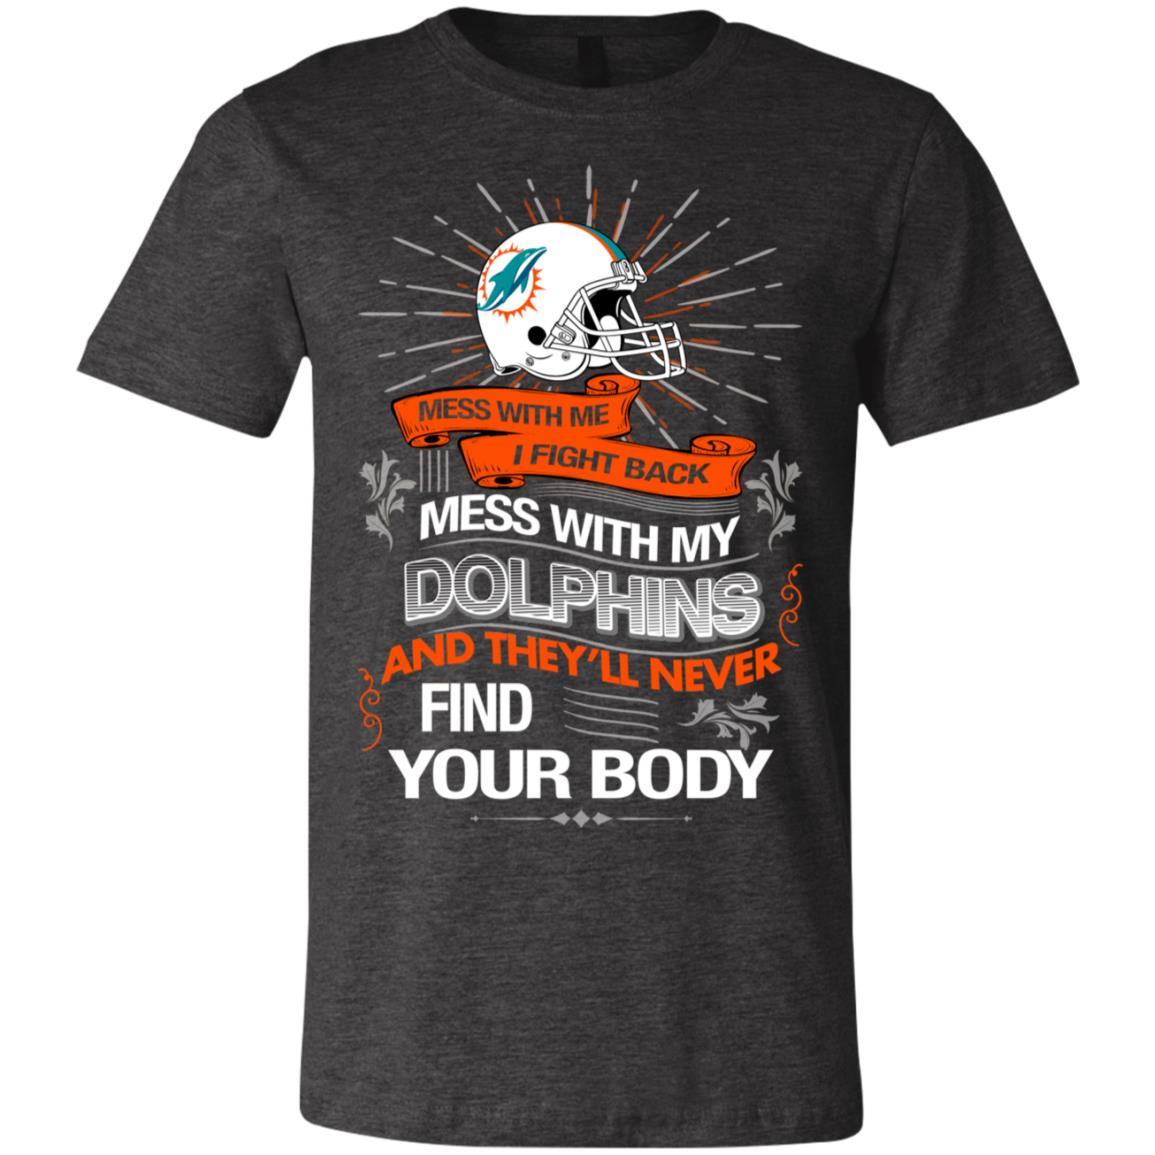 Miami Dolphins Shop - My Miami Dolphins And They'll Never Find Your Body Tshirt For Fan 2